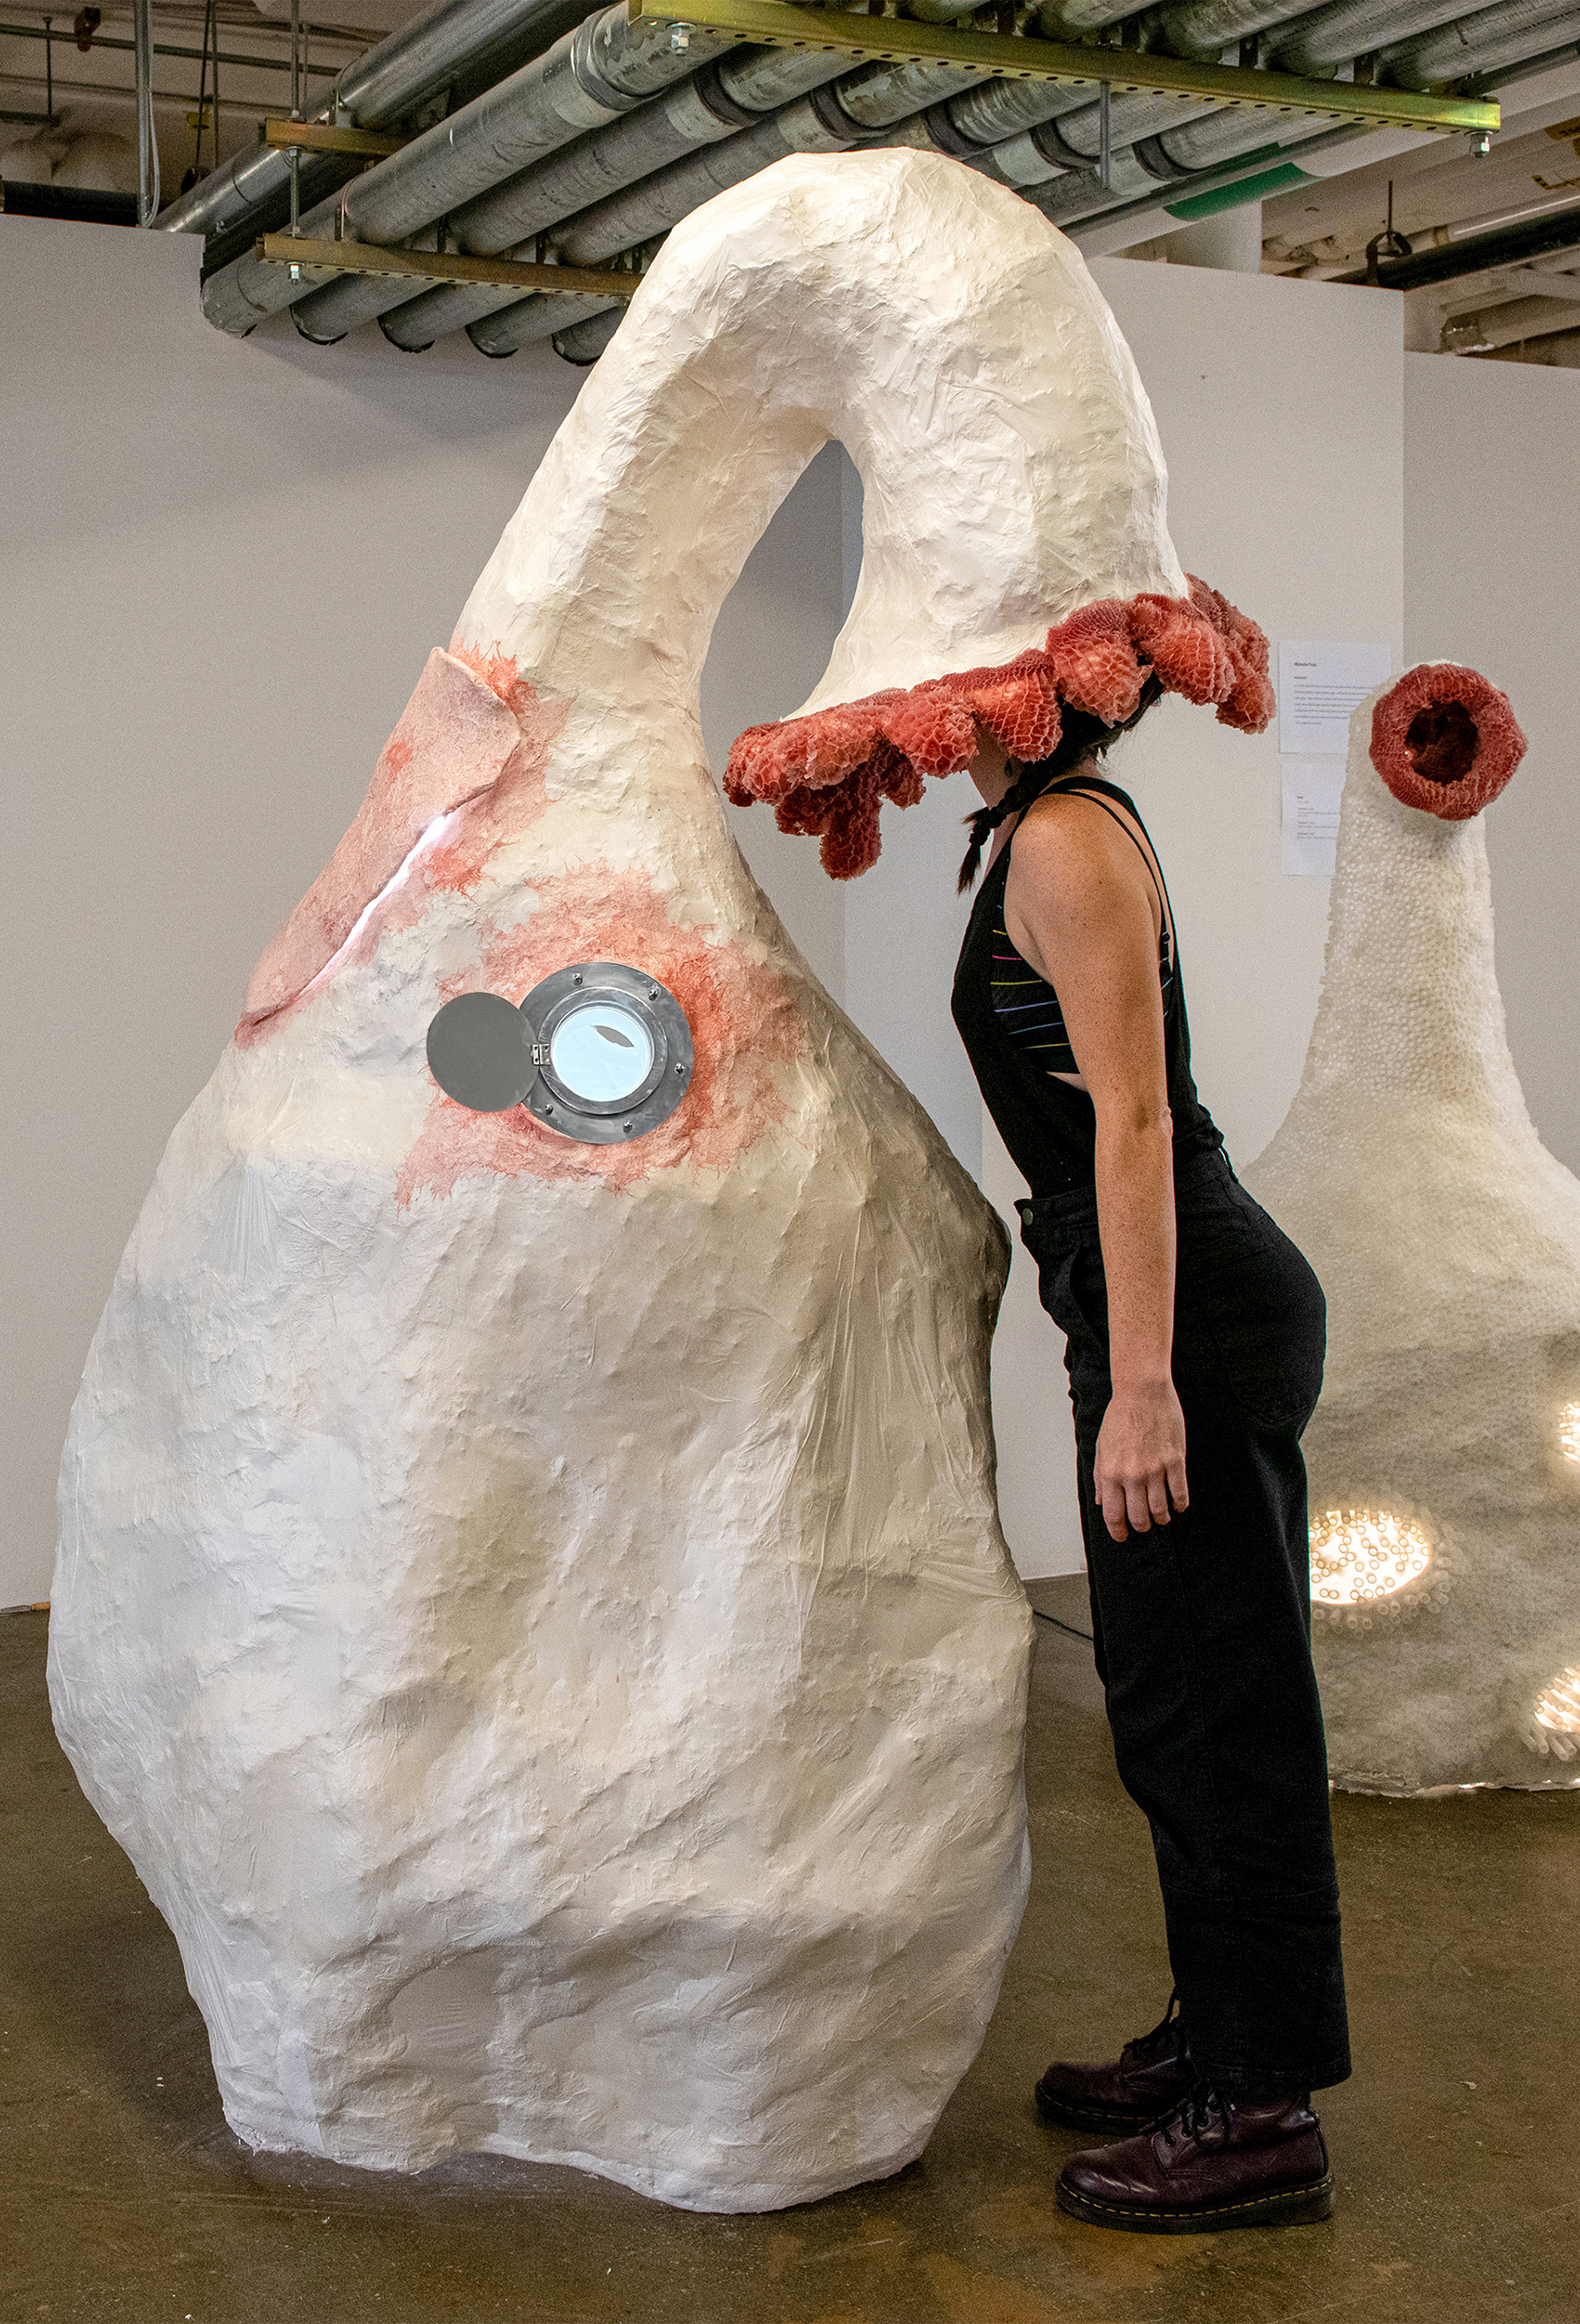 installation, resembles large gourd, woman with her head inside installation, at exhibition